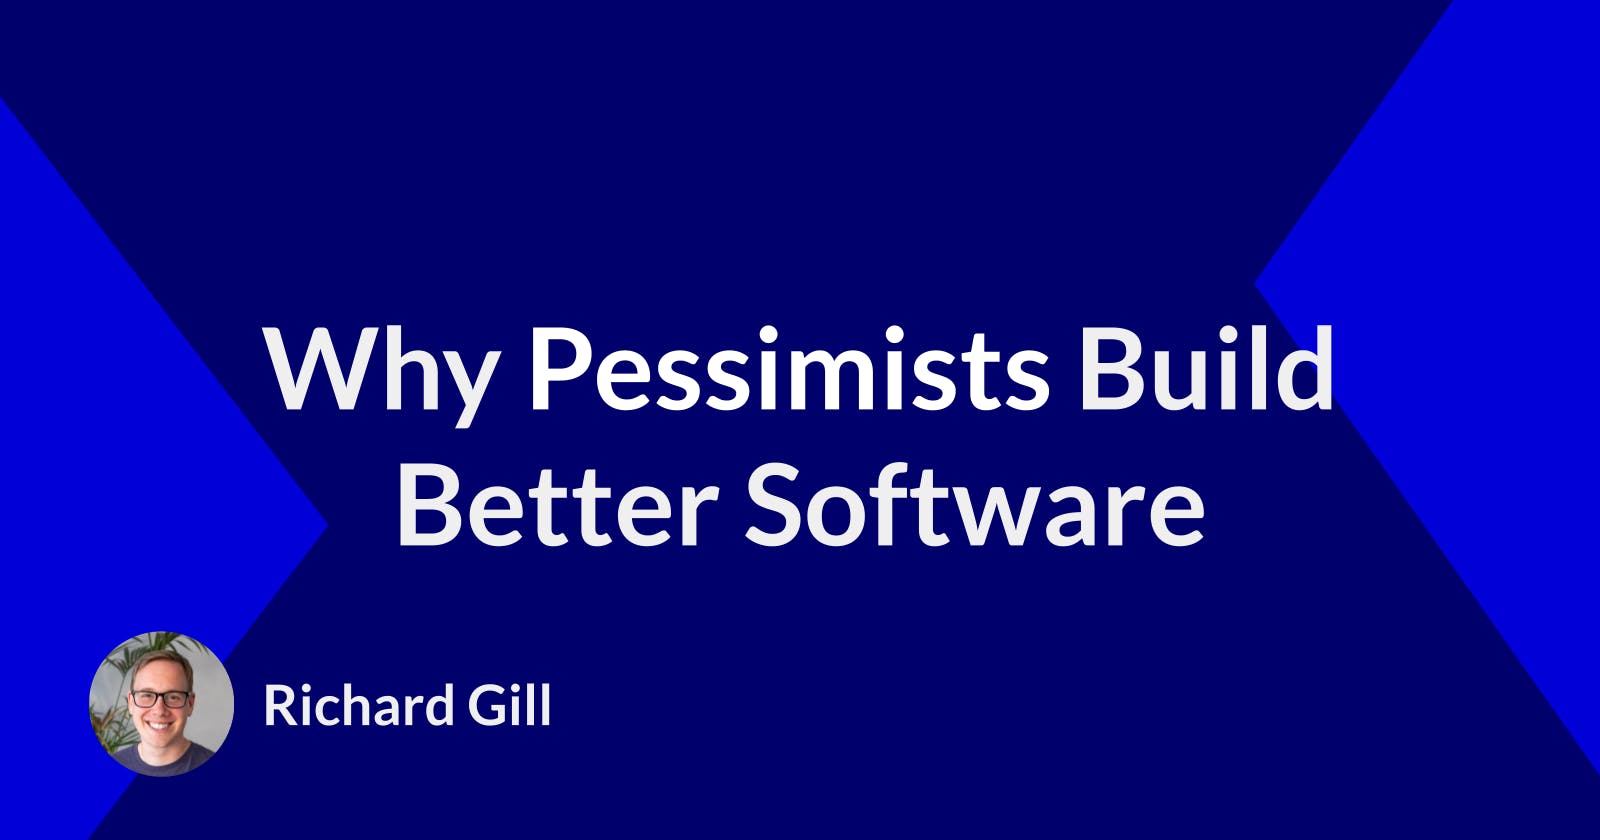 Why Pessimists Build Better Software